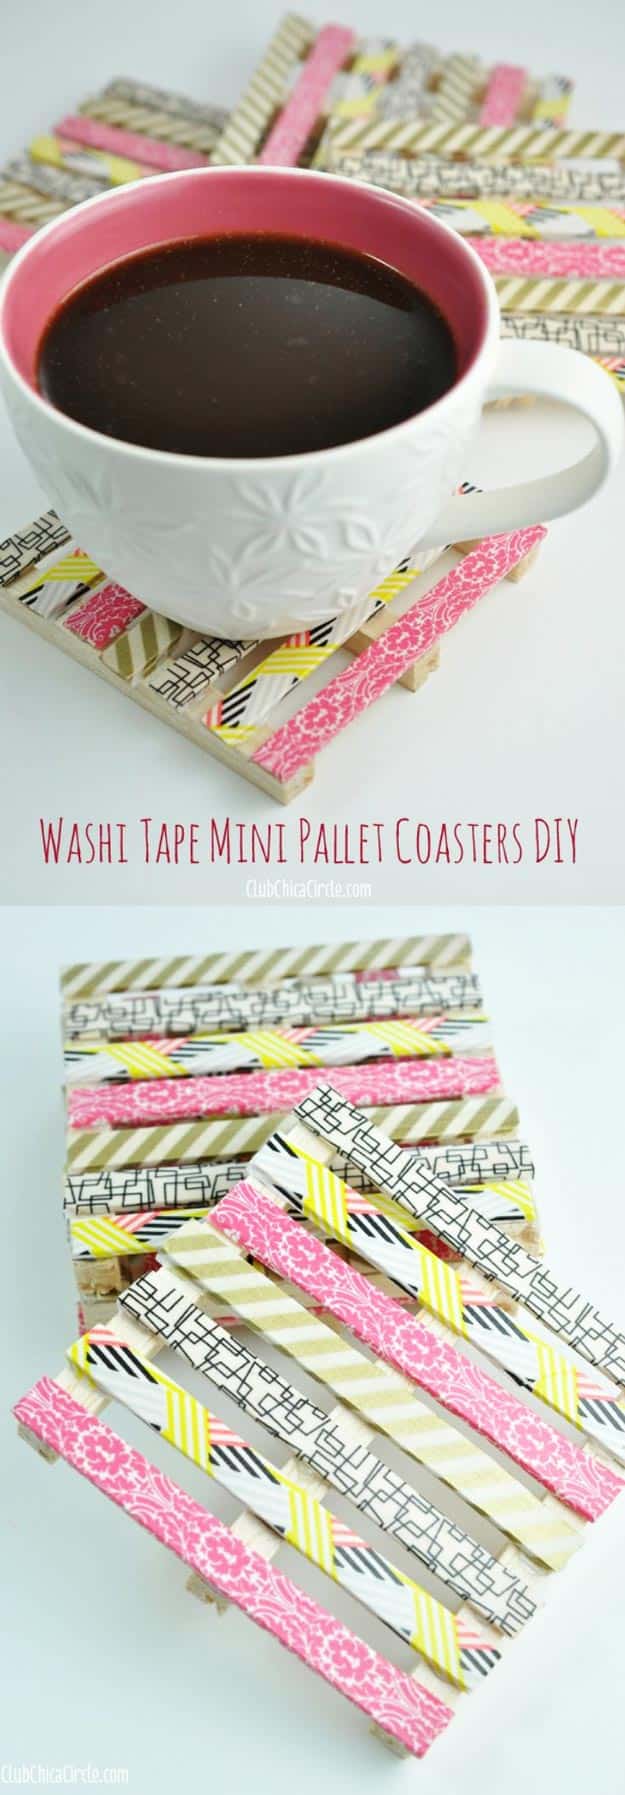 Cool DIY Ideas for Fun and Easy Crafts - DIY Donut Purse is a Cool Homemade Fashion Accessory - DIY Moon Pendant for Easy DIY Lighting in Teens Rooms - Dip Dyed String Wall Hanging - DIY Mini Easel Makes Fun DIY Room Decor Idea - Awesome Pinterest DIYs that Are Not Impossible To Make - Creative Do It Yourself Craft Projects for Adults, Teens and Tweens.Washi Tape Mini Wood Pallet Coasters - Easy DIY Ideas for Cheap Things To Sell on Etsy, Online and for Craft Fairs #diyteens #teencrafts #funcrafts #fundiy #diyideas 